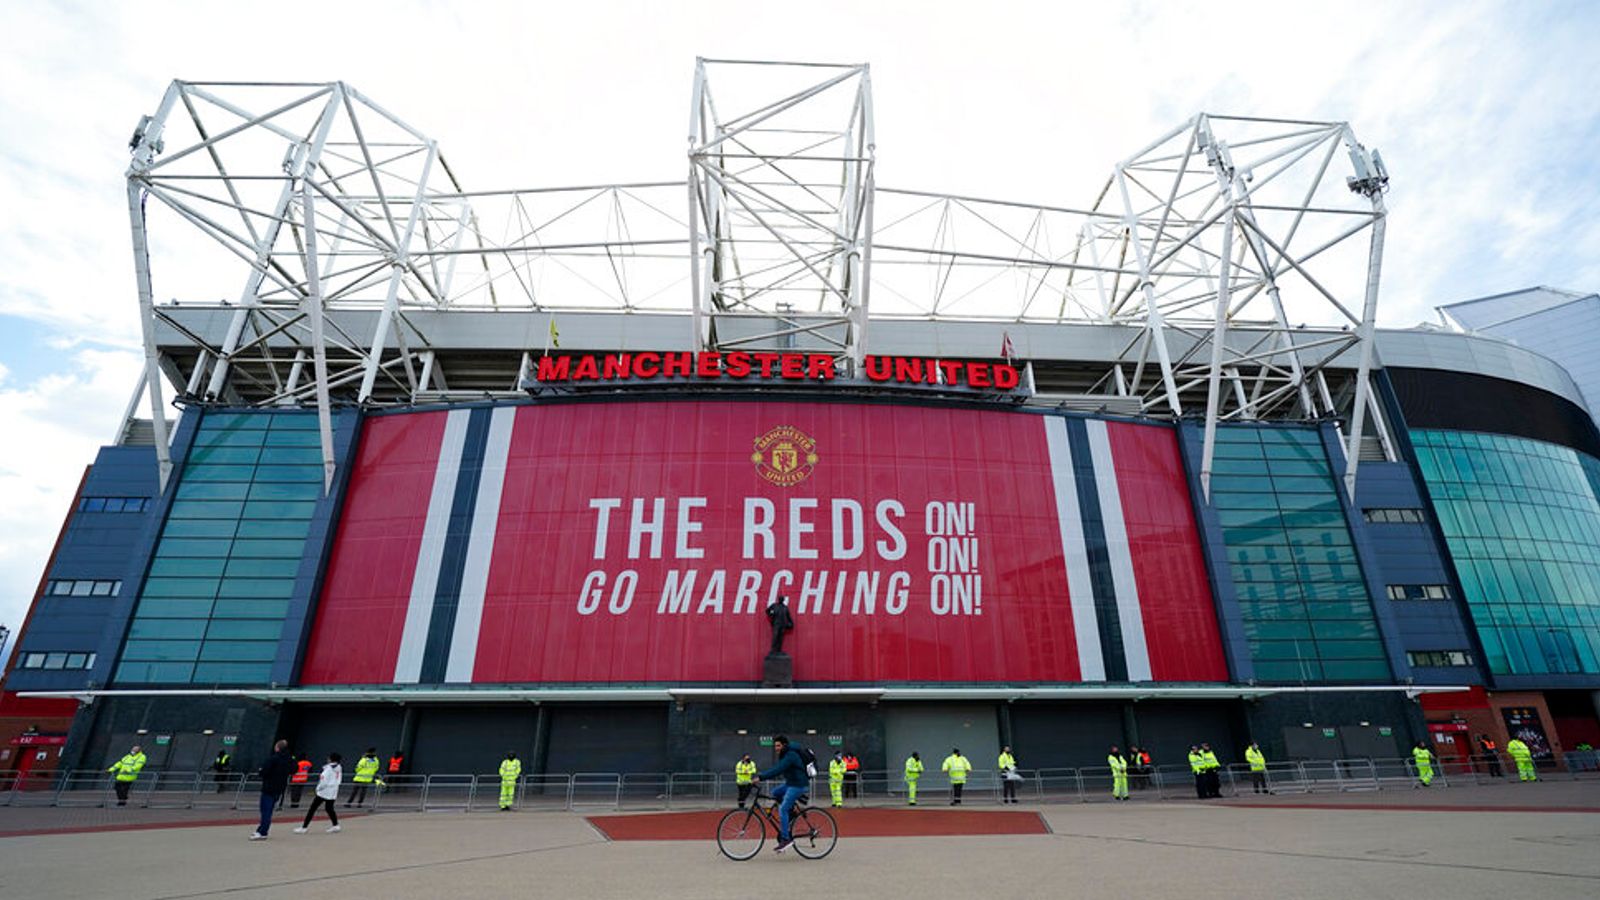 Manchester United owners confirm they could sell the club as strategic review launched